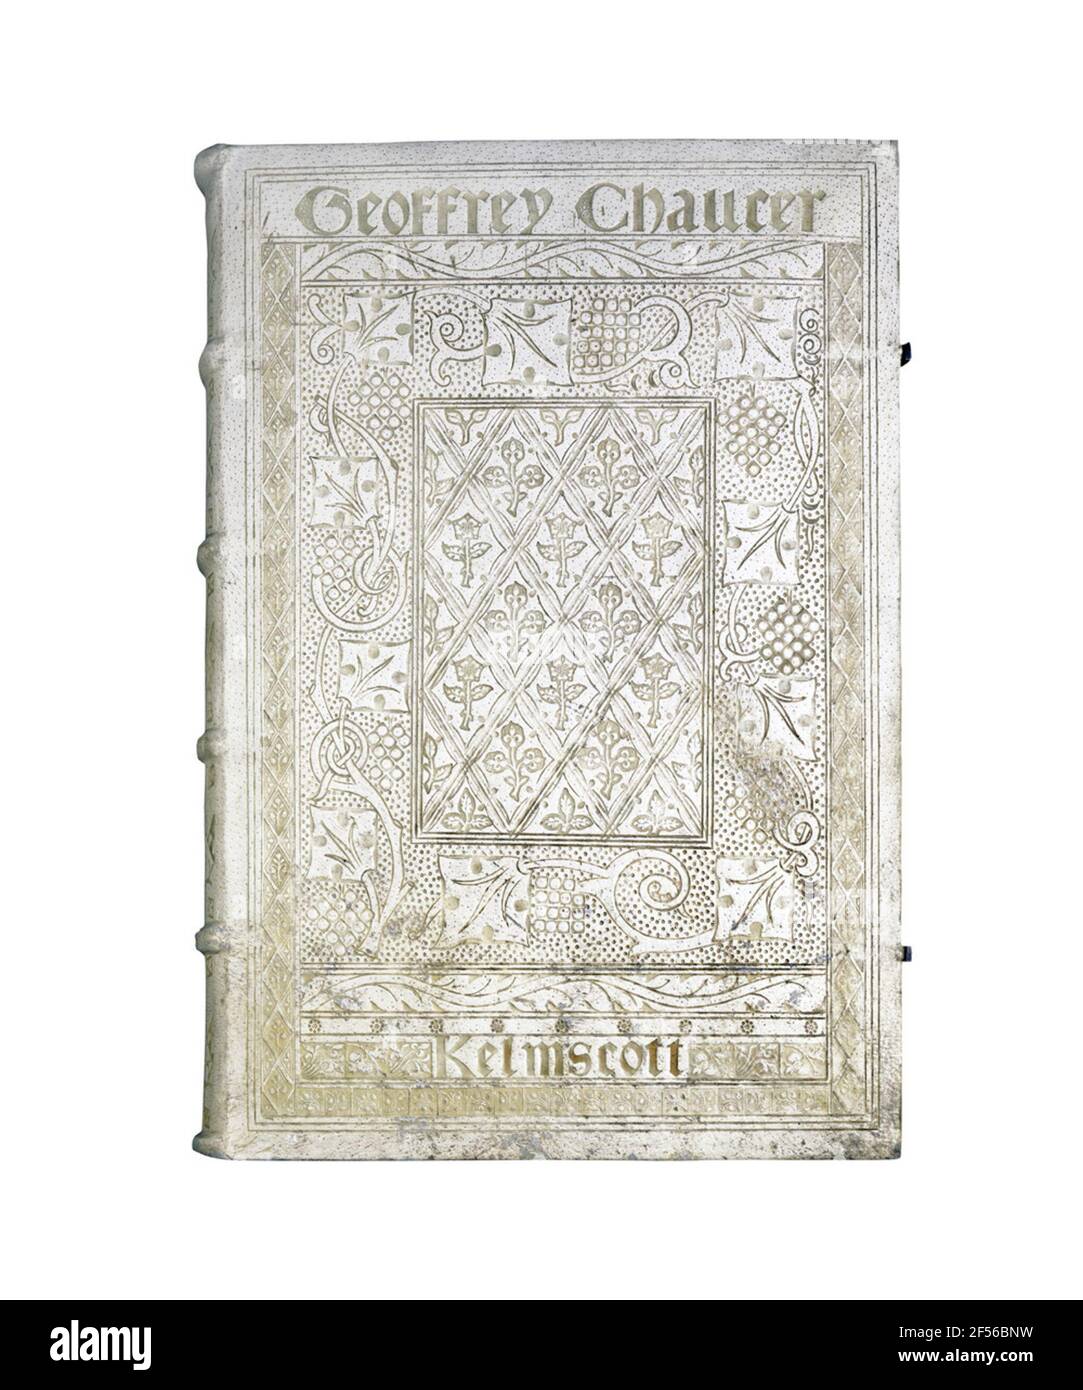 Kelmscott Chaucer. The factory issue of Geoffrey Chaucer, which appears in the folio format in 1896, is the most famous pressure of the Kelmscott Press and a monument of the new book art movement. This so-called 'Kelmscott Chaucer' is a true-designed book artwork a real community work, where several people worked together in a workshop community. William Morris, who has selected a classic of English literature with the late medieval author Chaucer, created its own font type for the text of this issue, the so-called Chaucer-Type, which is based on the round-gothic fonts of early prints, and als Stock Photo